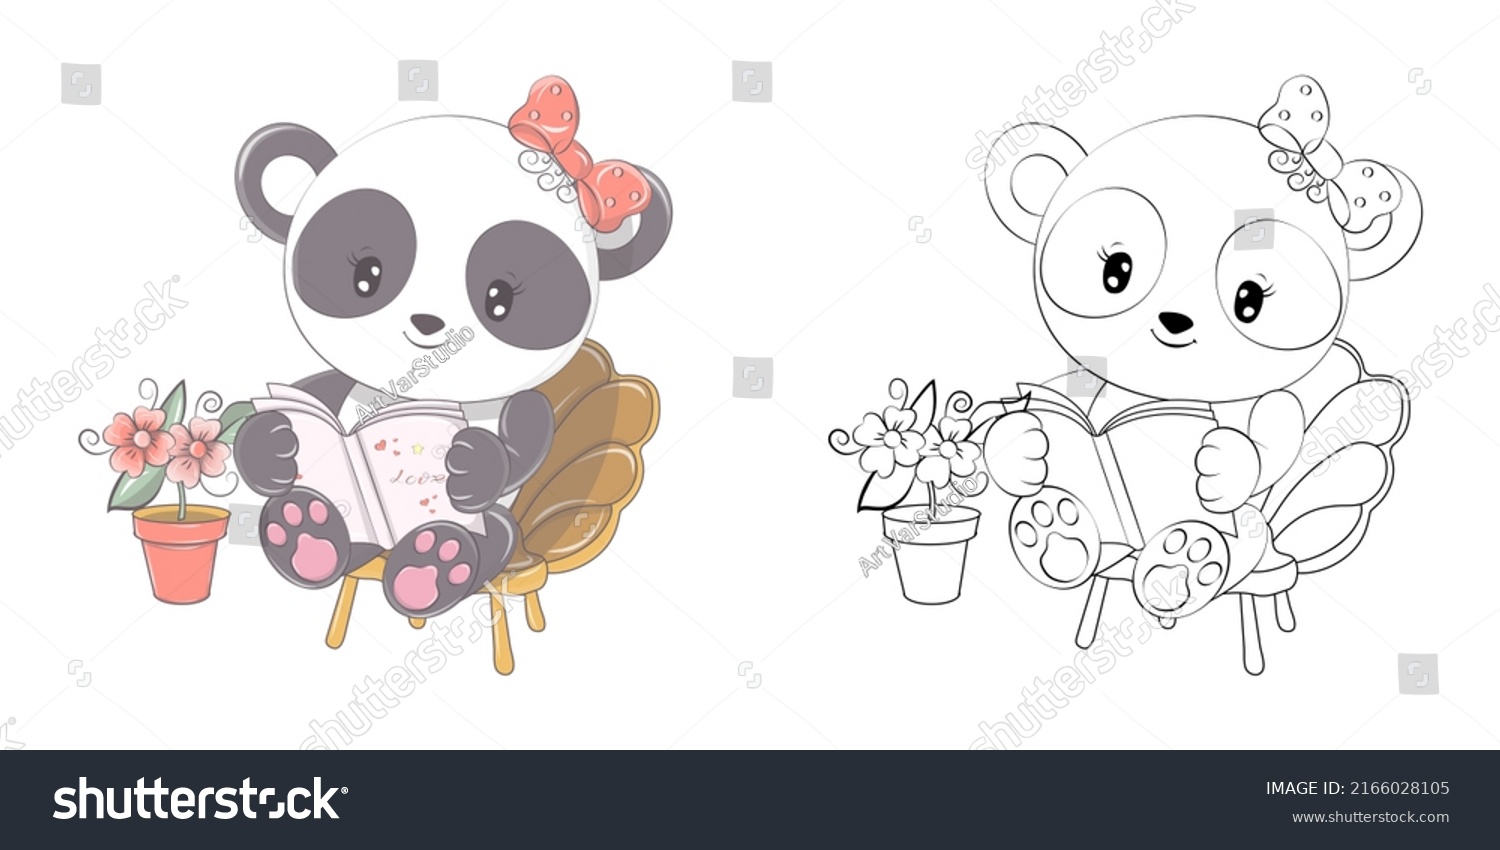 SVG of Cute Panda Clipart Illustration and Black and White. Funny Clip Art Panda Reads a Book. Vector Illustration of an Animal for Coloring Pages, Stickers, Baby Shower, Prints for Clothes.  svg